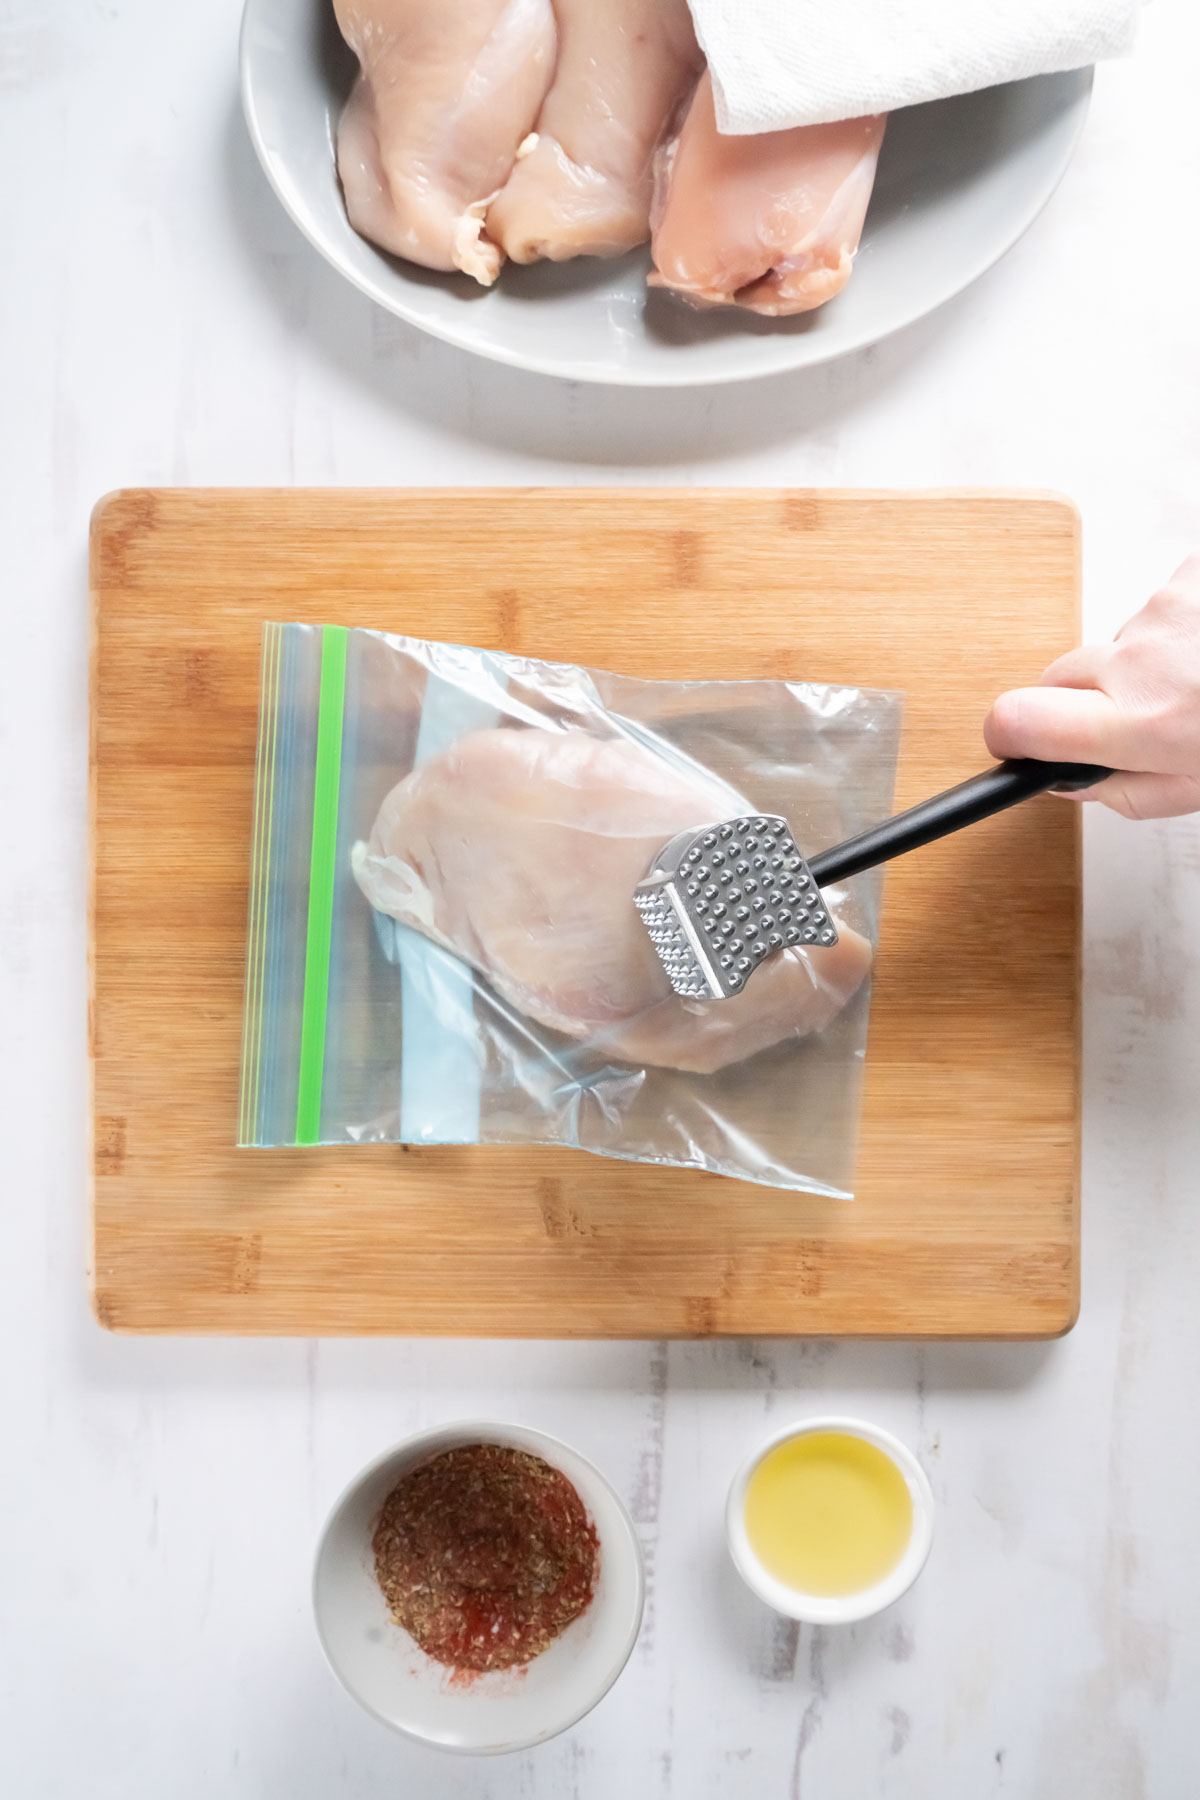 Pounding chicken breast with meat mallet.